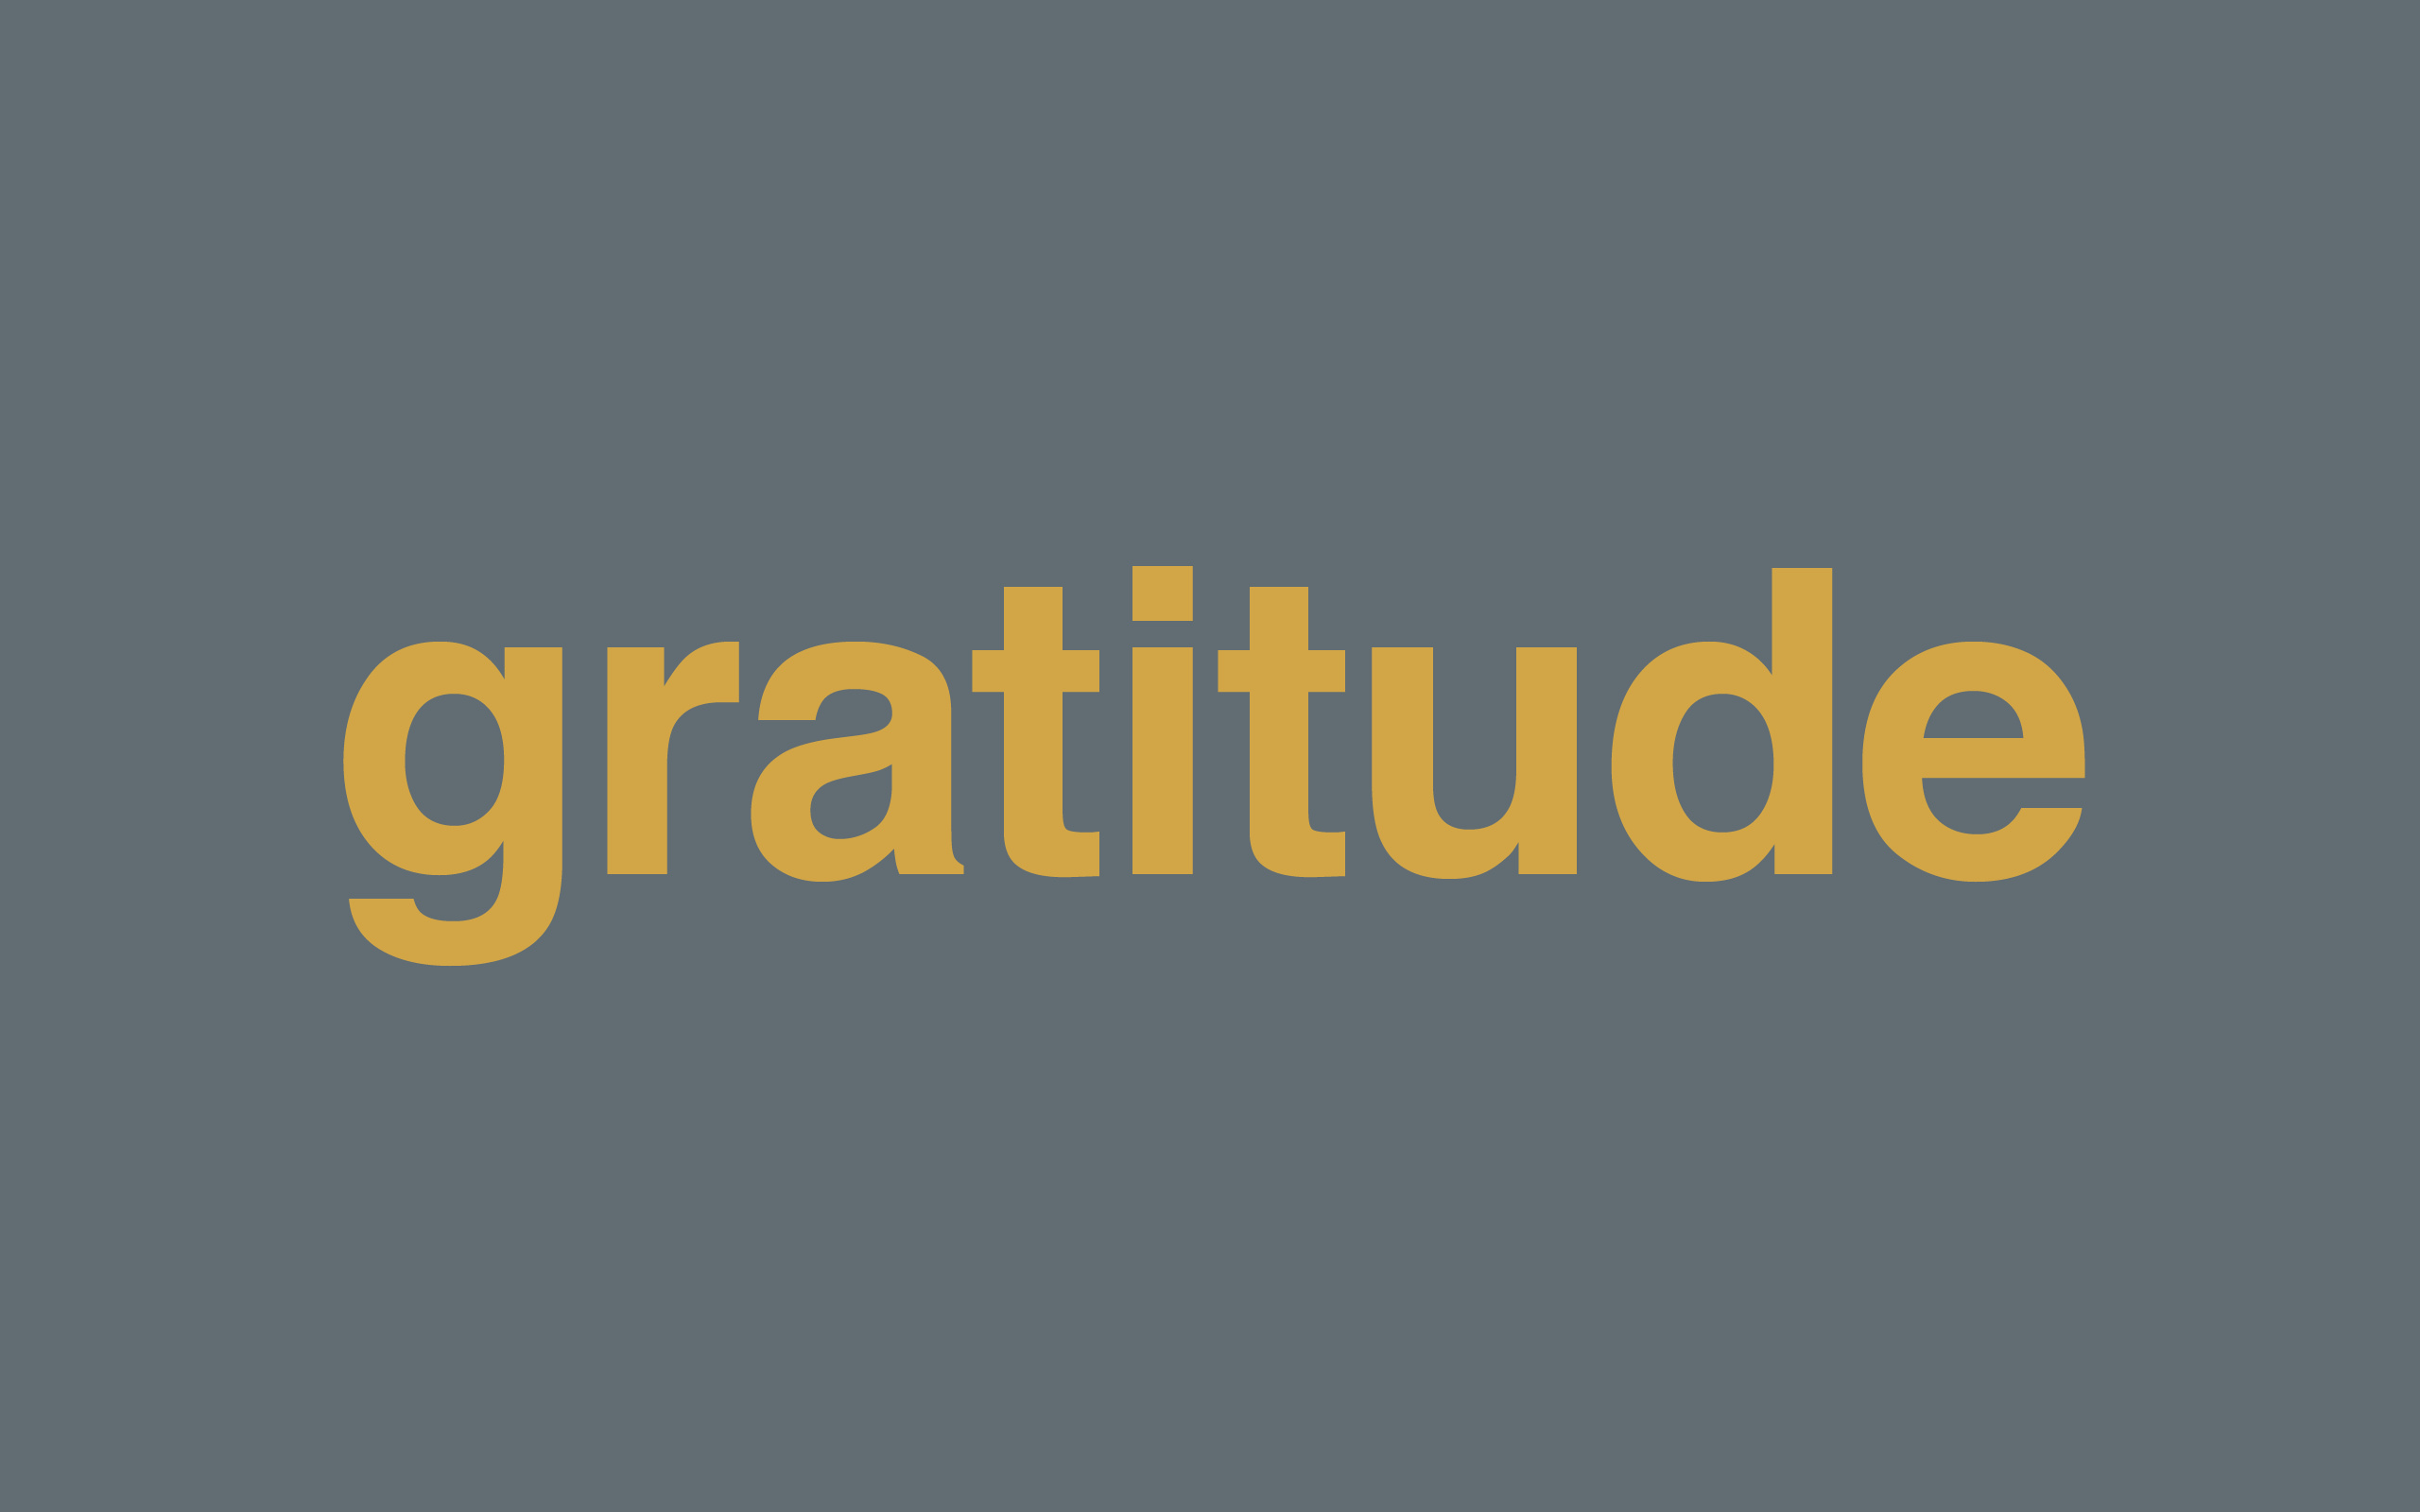 Gratitude: Poster, Minimalistic, Encouraging, The right mindset. 2560x1600 HD Wallpaper.